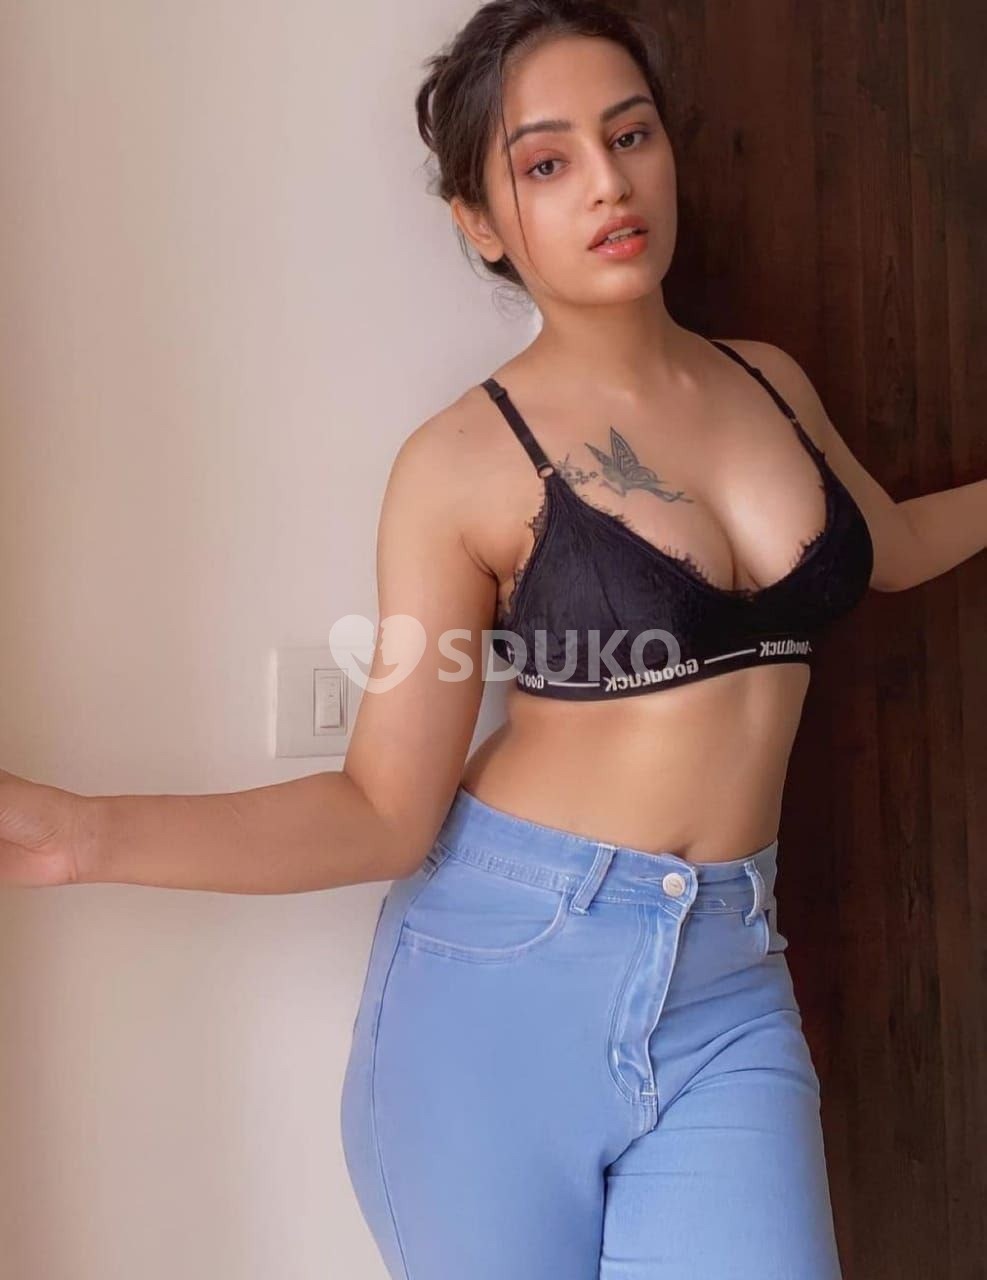 MY SELF KAVYA SHARMA//💯✅ BEST INDEPENDENT CALL GIRLS SERVICE AVAILABLE GENUINE SERVICE